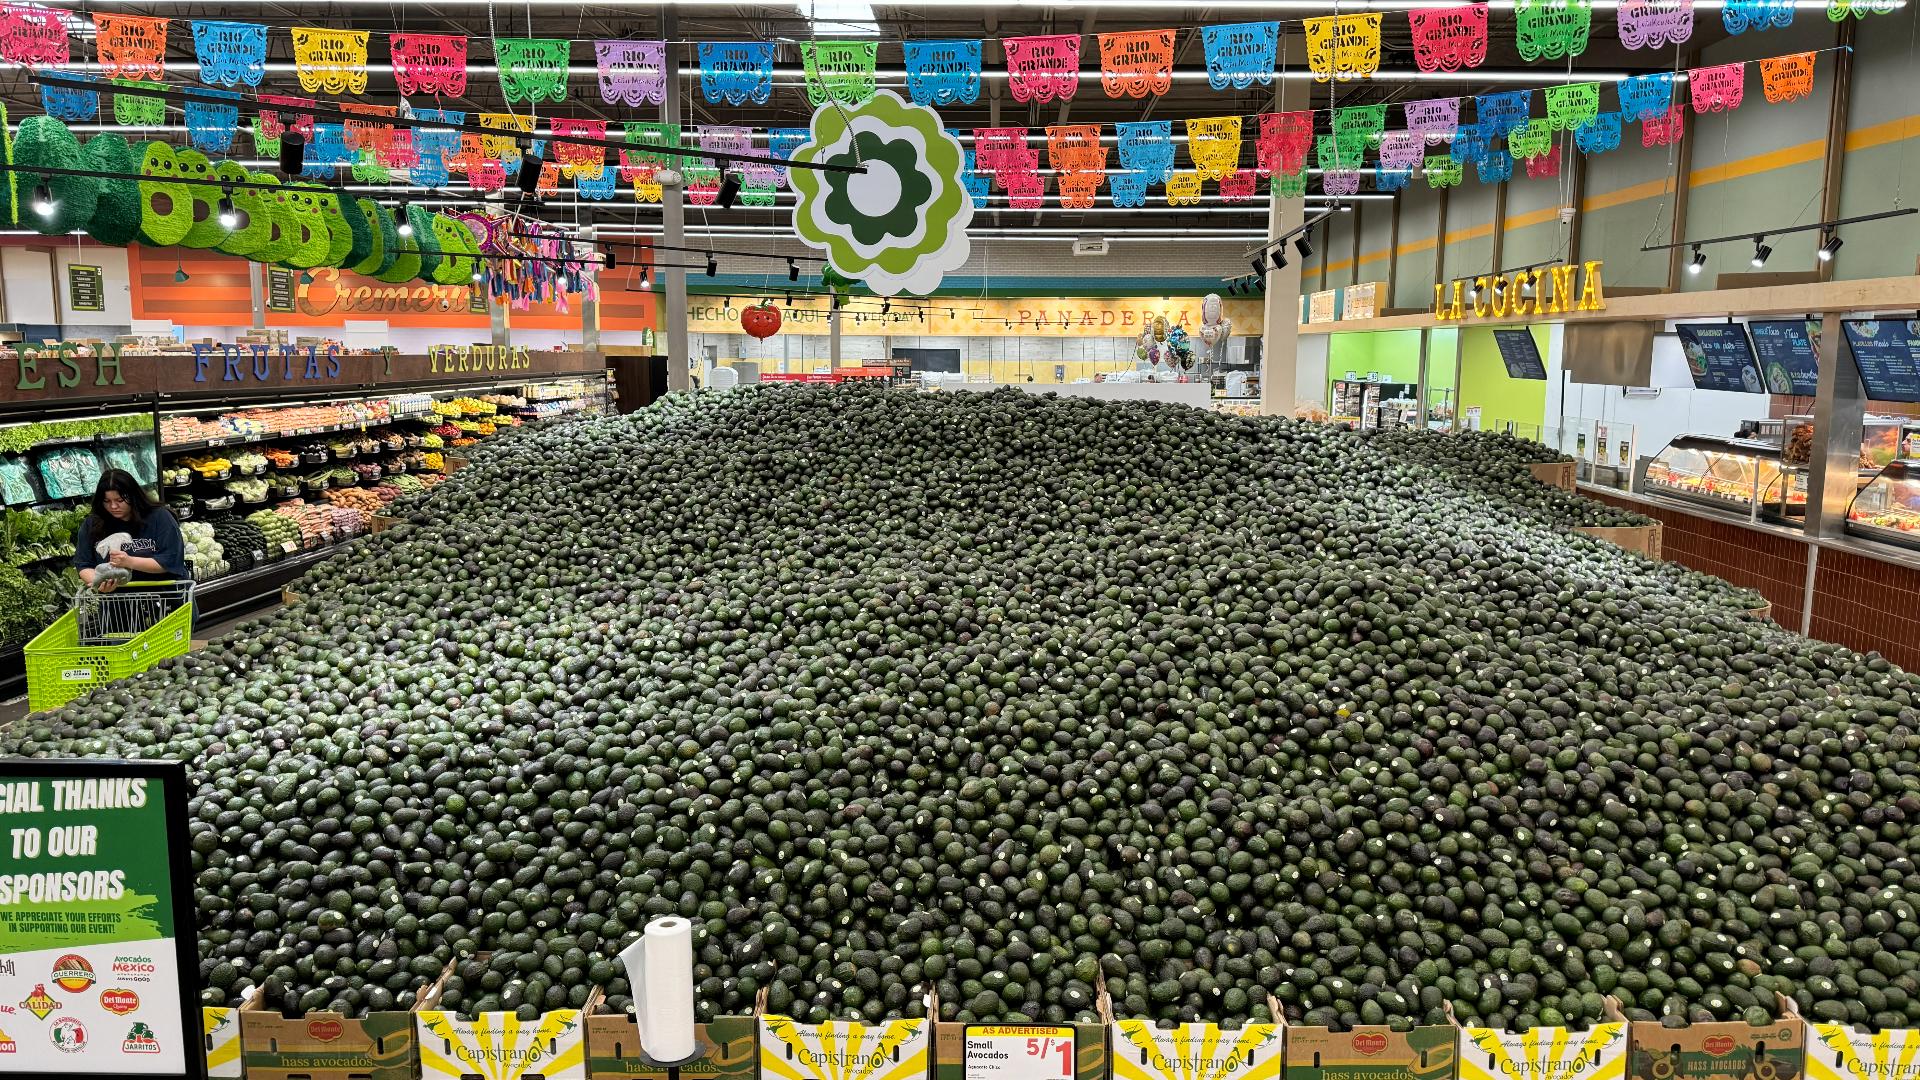 The store, located at 3035 N Buckner Blvd., was turned into an avocado wonderland!